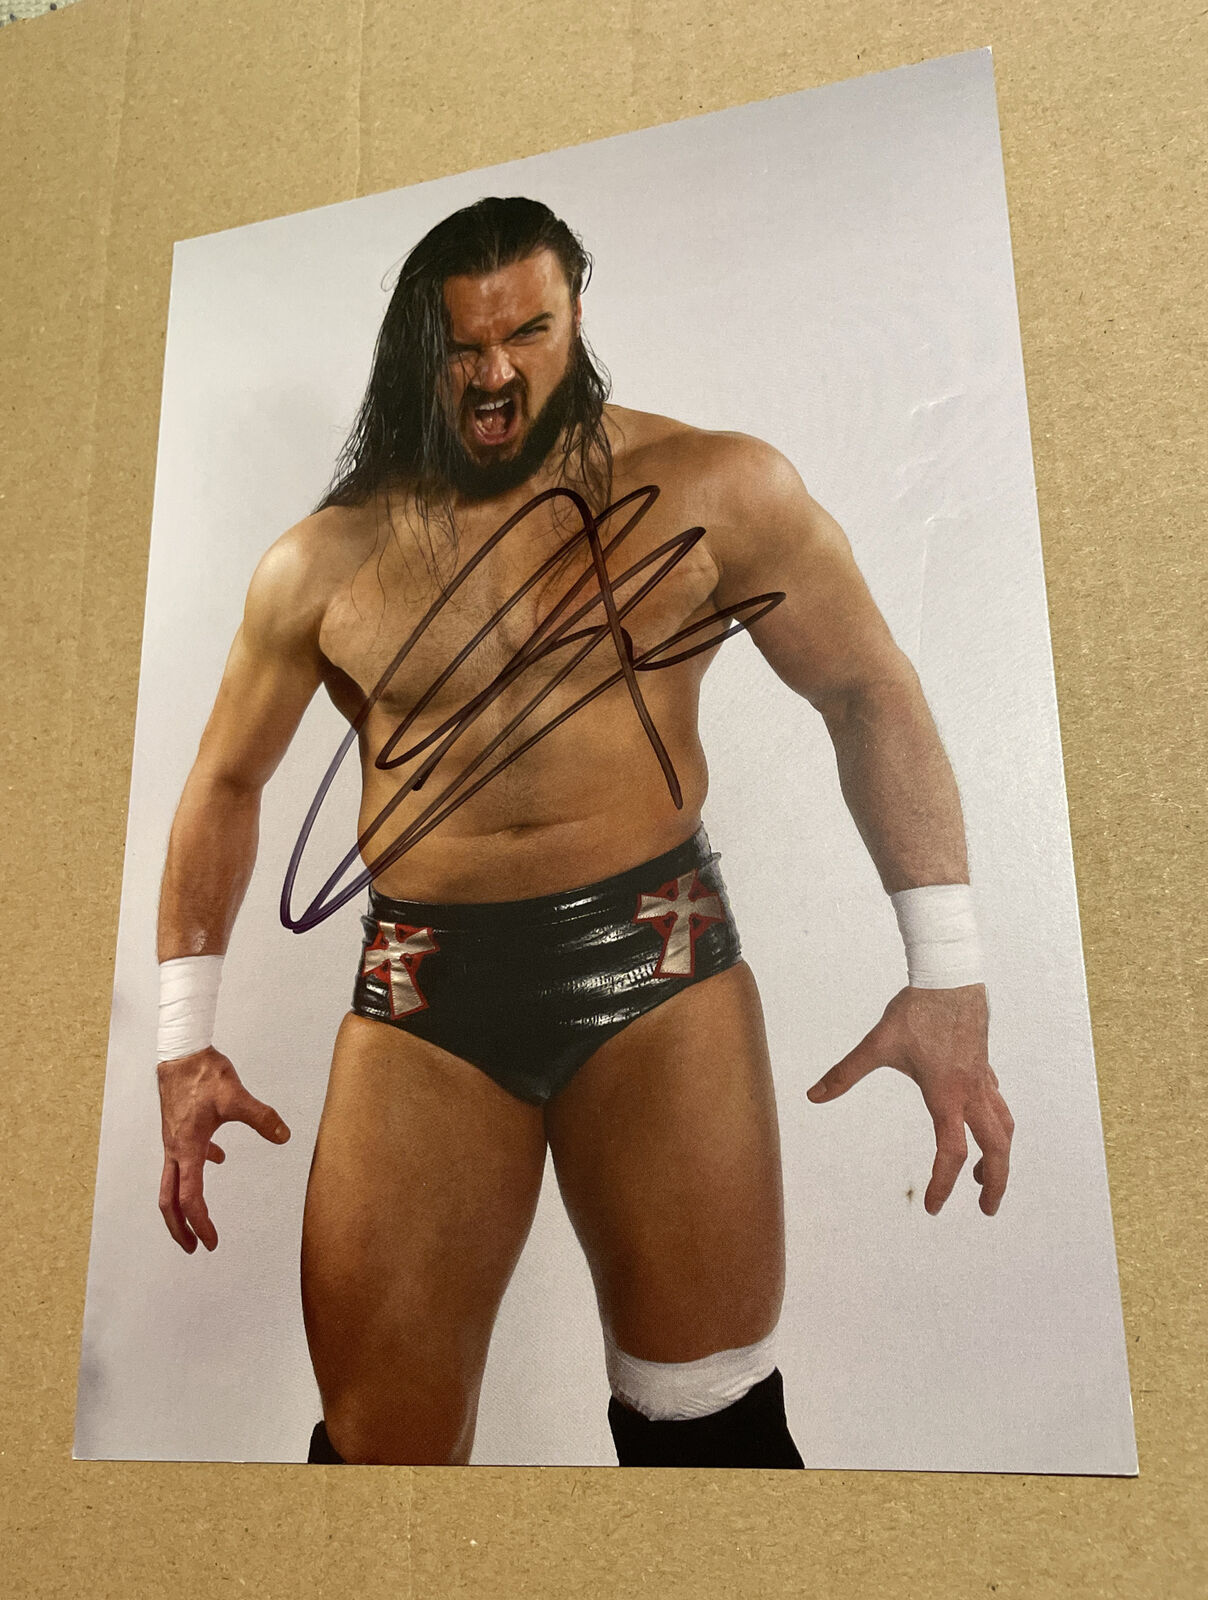 Drew Mcintyre/Galloway Hand Signed 8x6 Photo Poster painting WWE TNA Wrestling Autograph